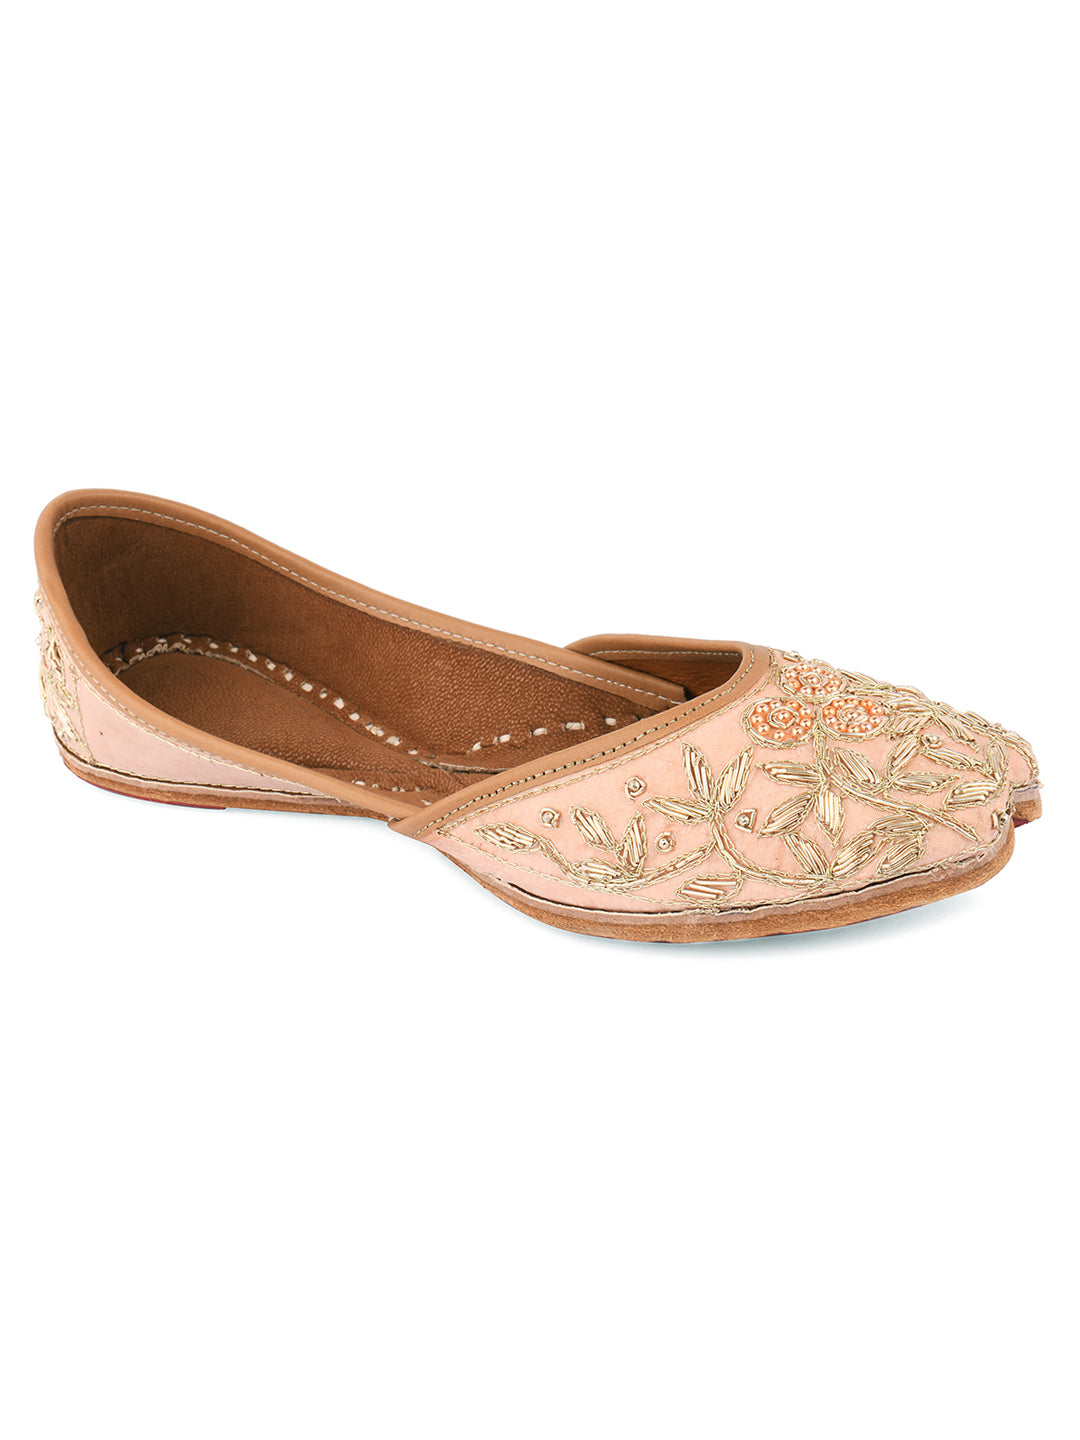 DESI COLOUR Women Multicoloured Embellished Leather Ethnic Mojaris with Laser Cuts Flats